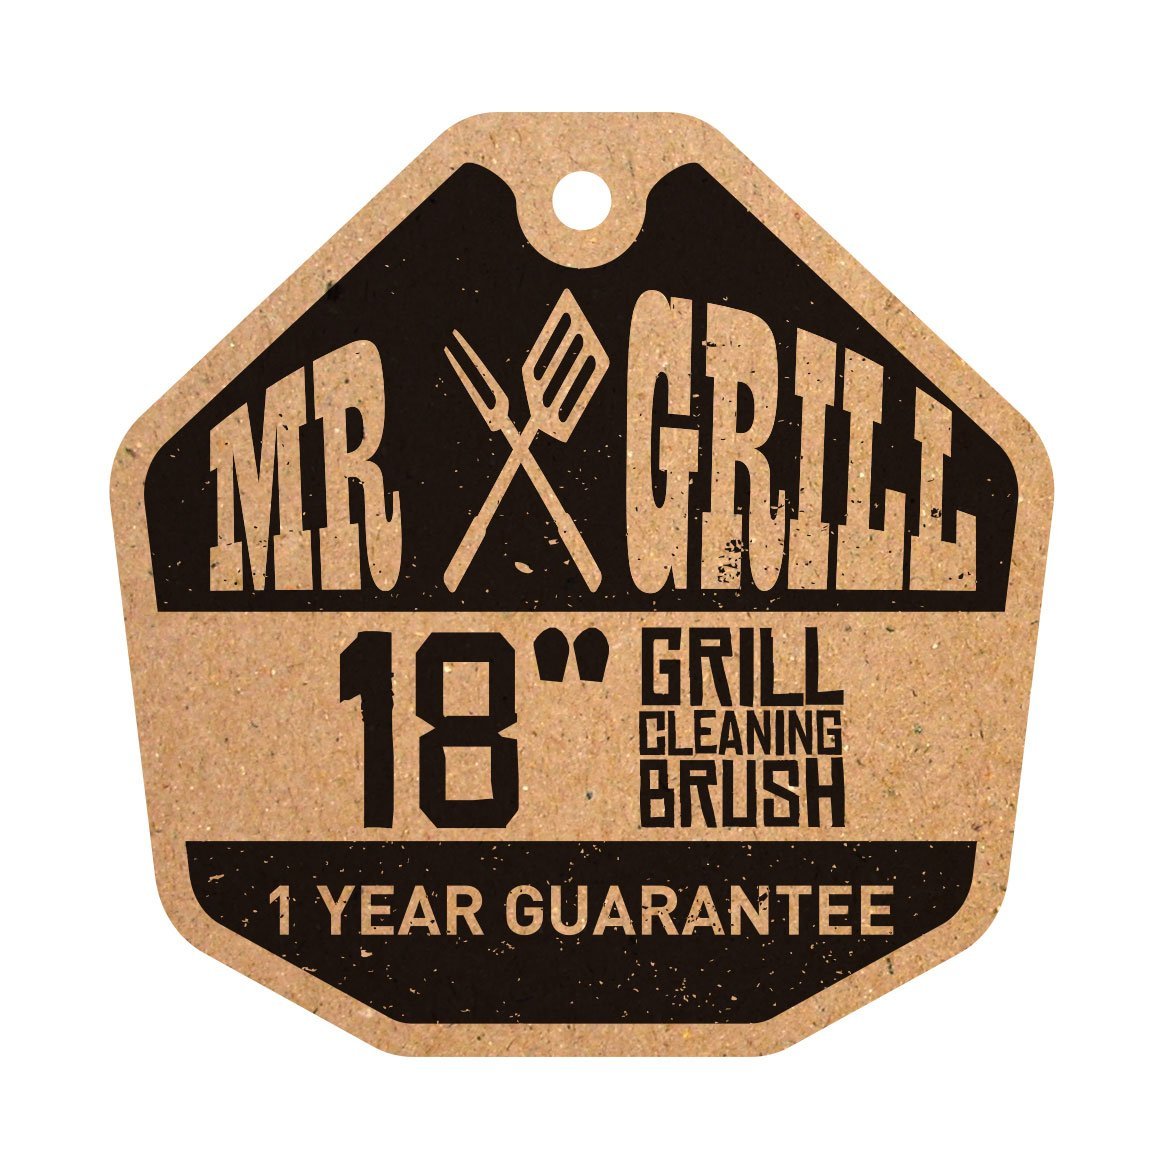 Mr. Grill 18 Inch Grill Cleaning Brush Review